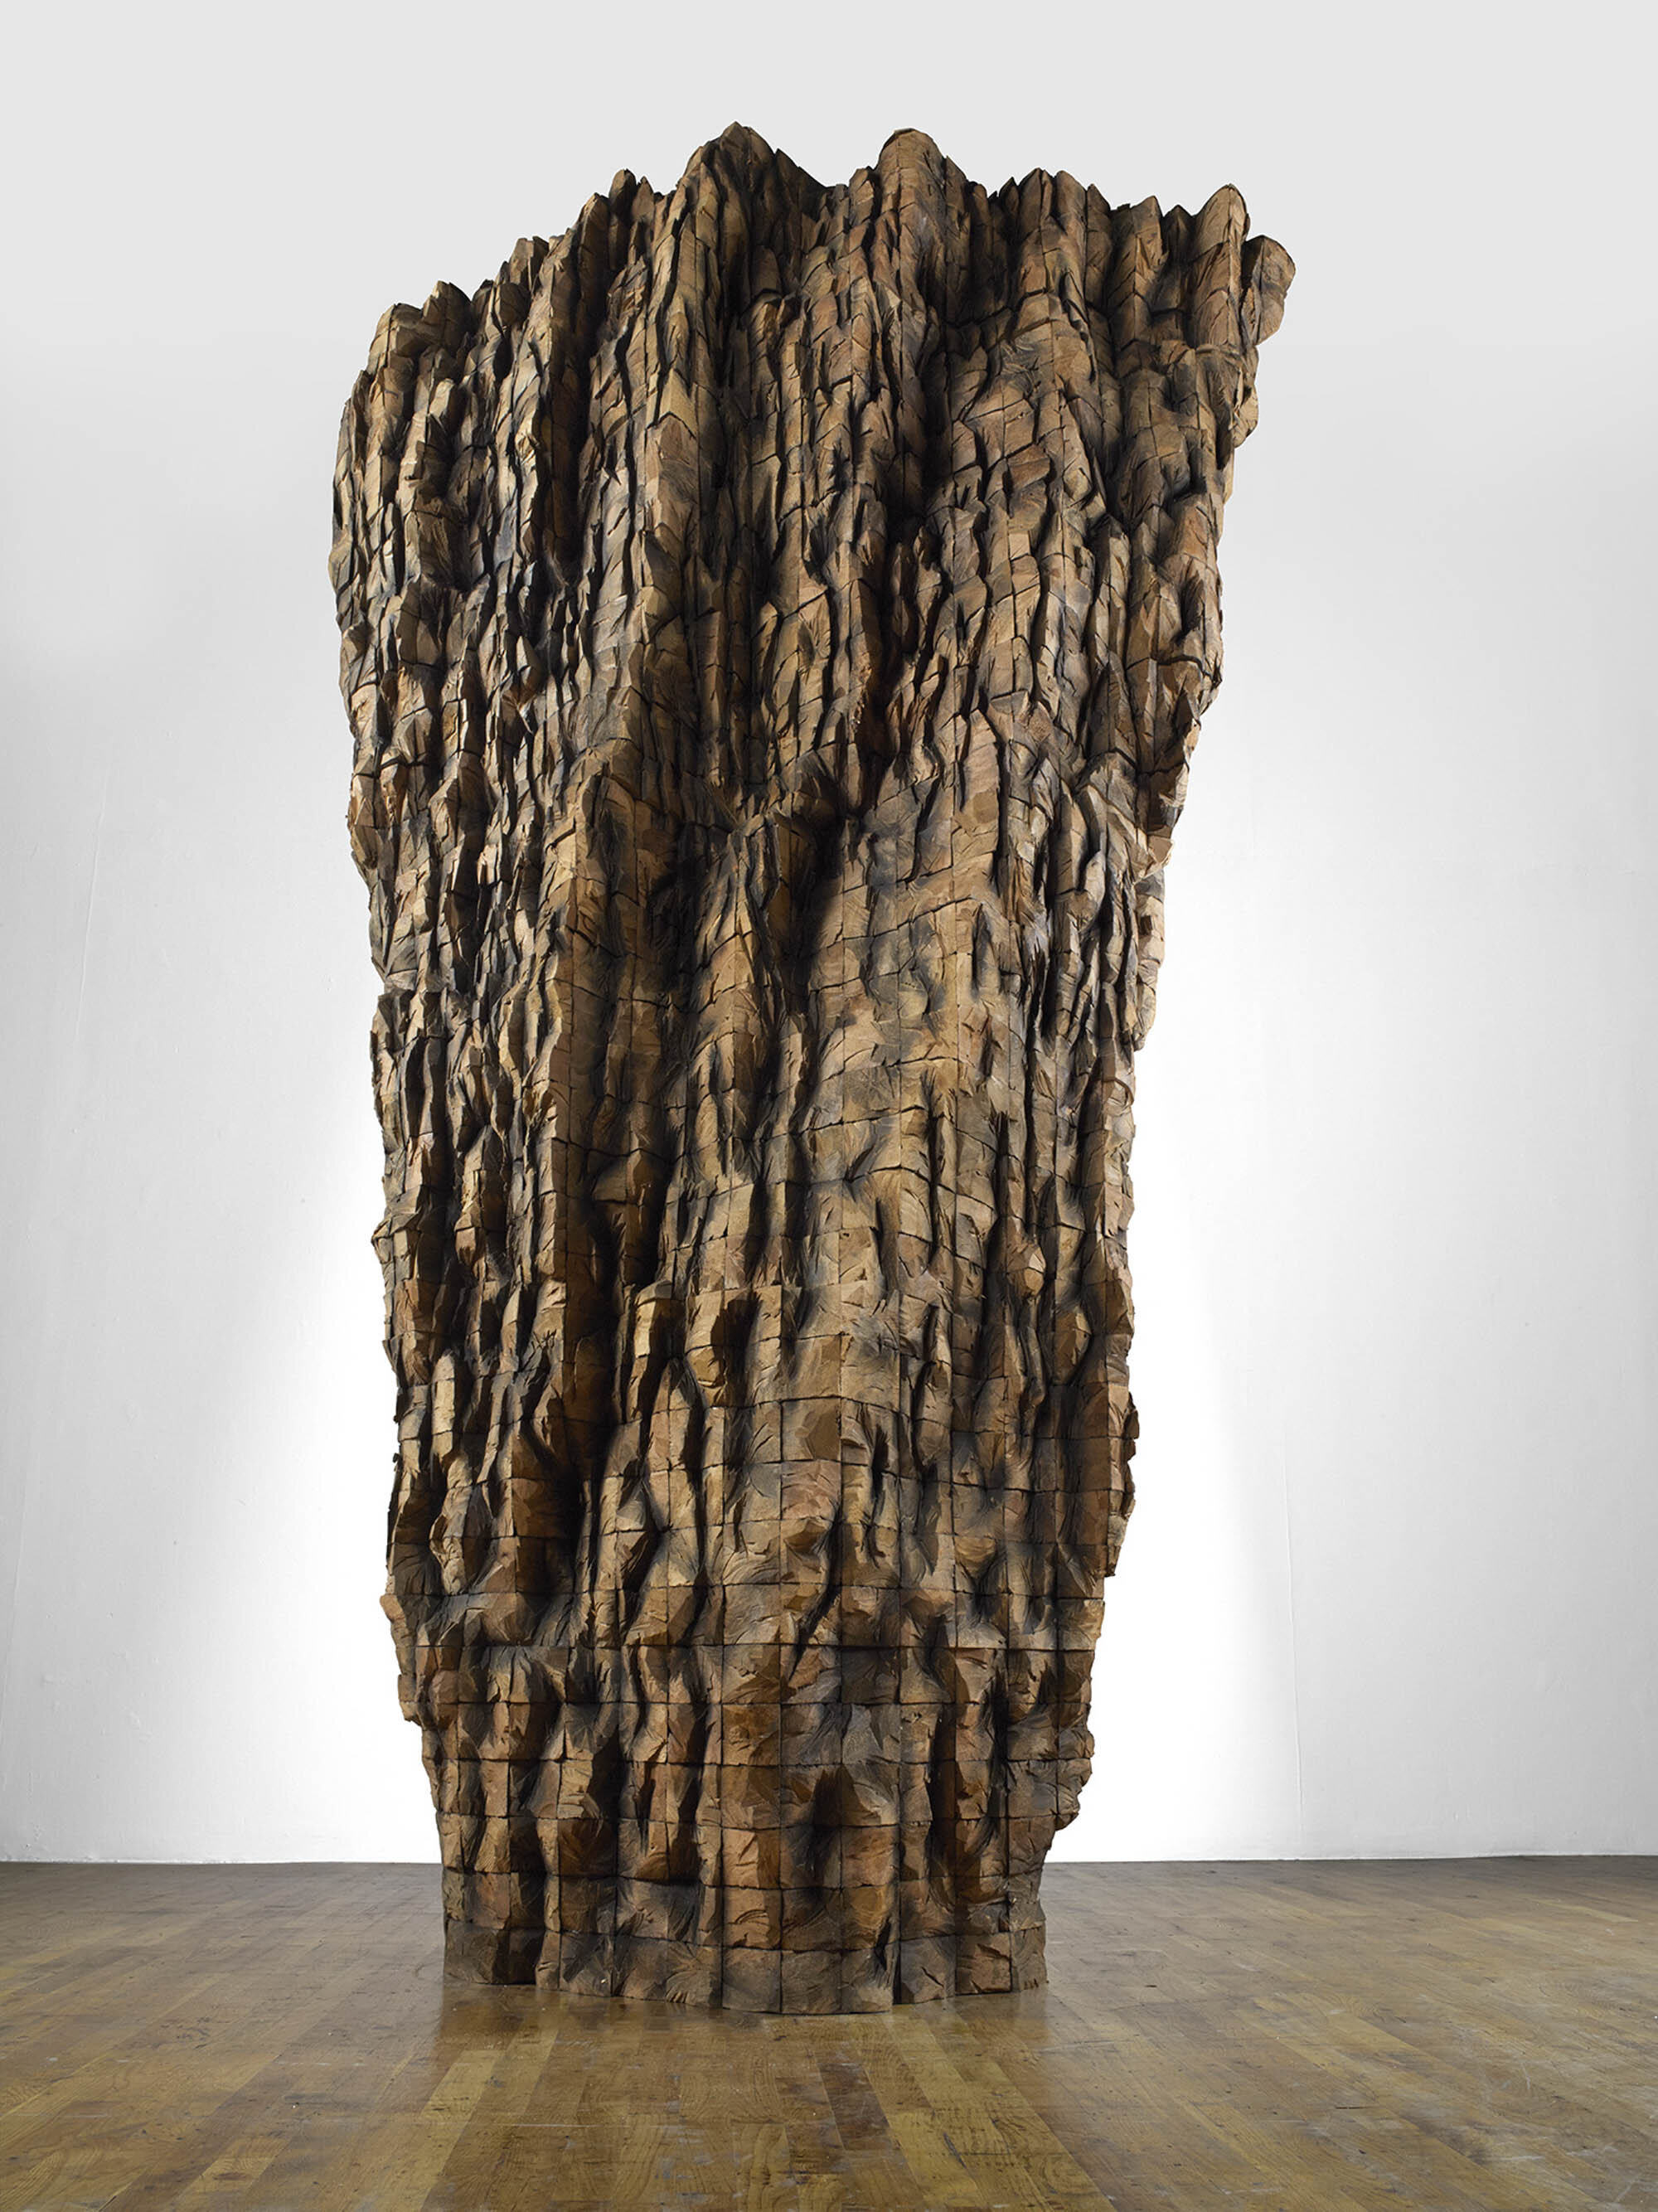       Krypta I , 2014 Cedar and graphite 125.5 x 77.5 x 56 in.    MORE IMAGES   The Fabric Workshop and Museum  